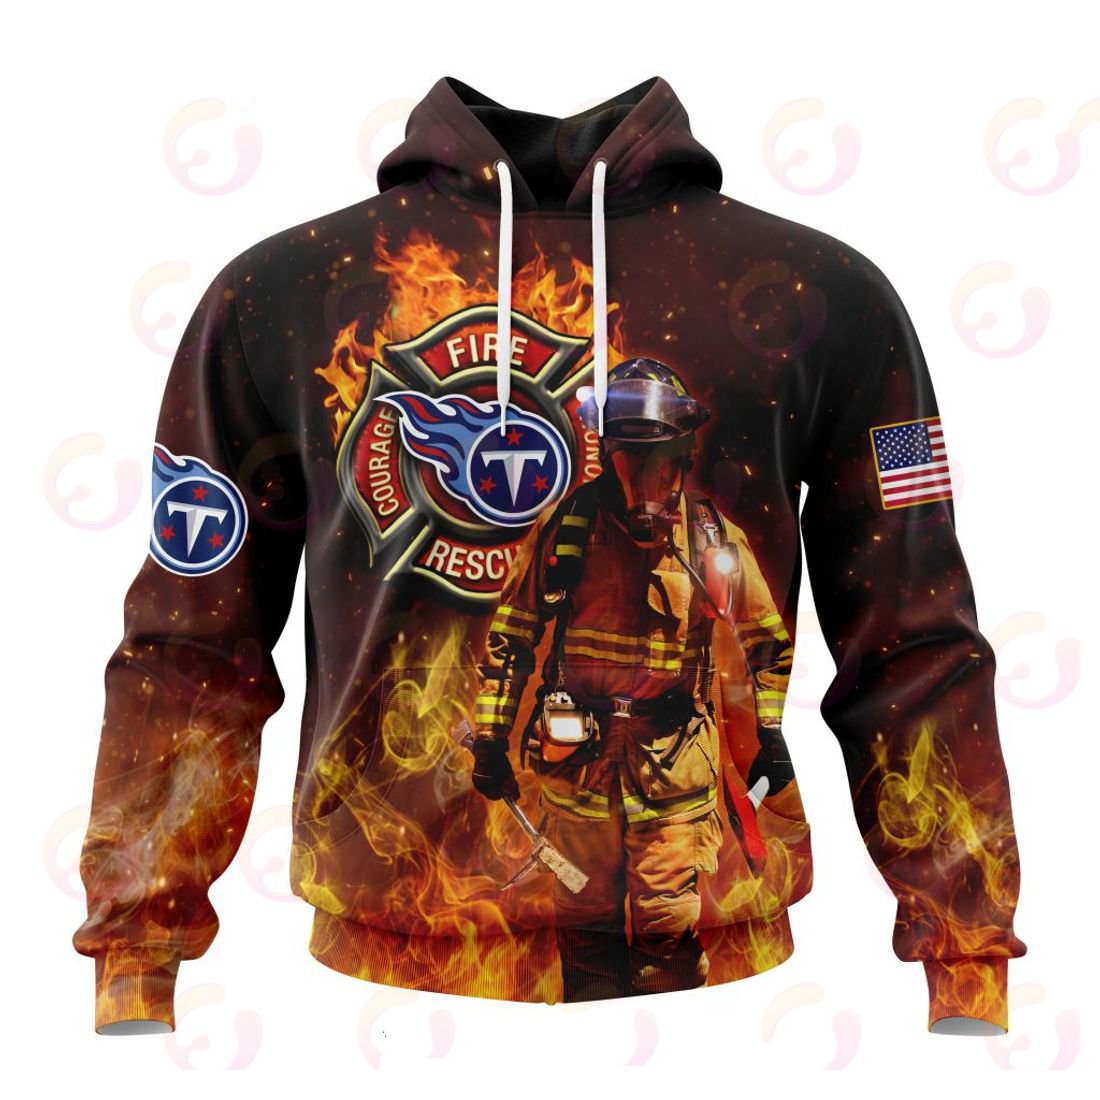 TENNESSEE TITANS HONOR FIREFIGHTERS – FIRST RESPONDERS 3D HOODIE